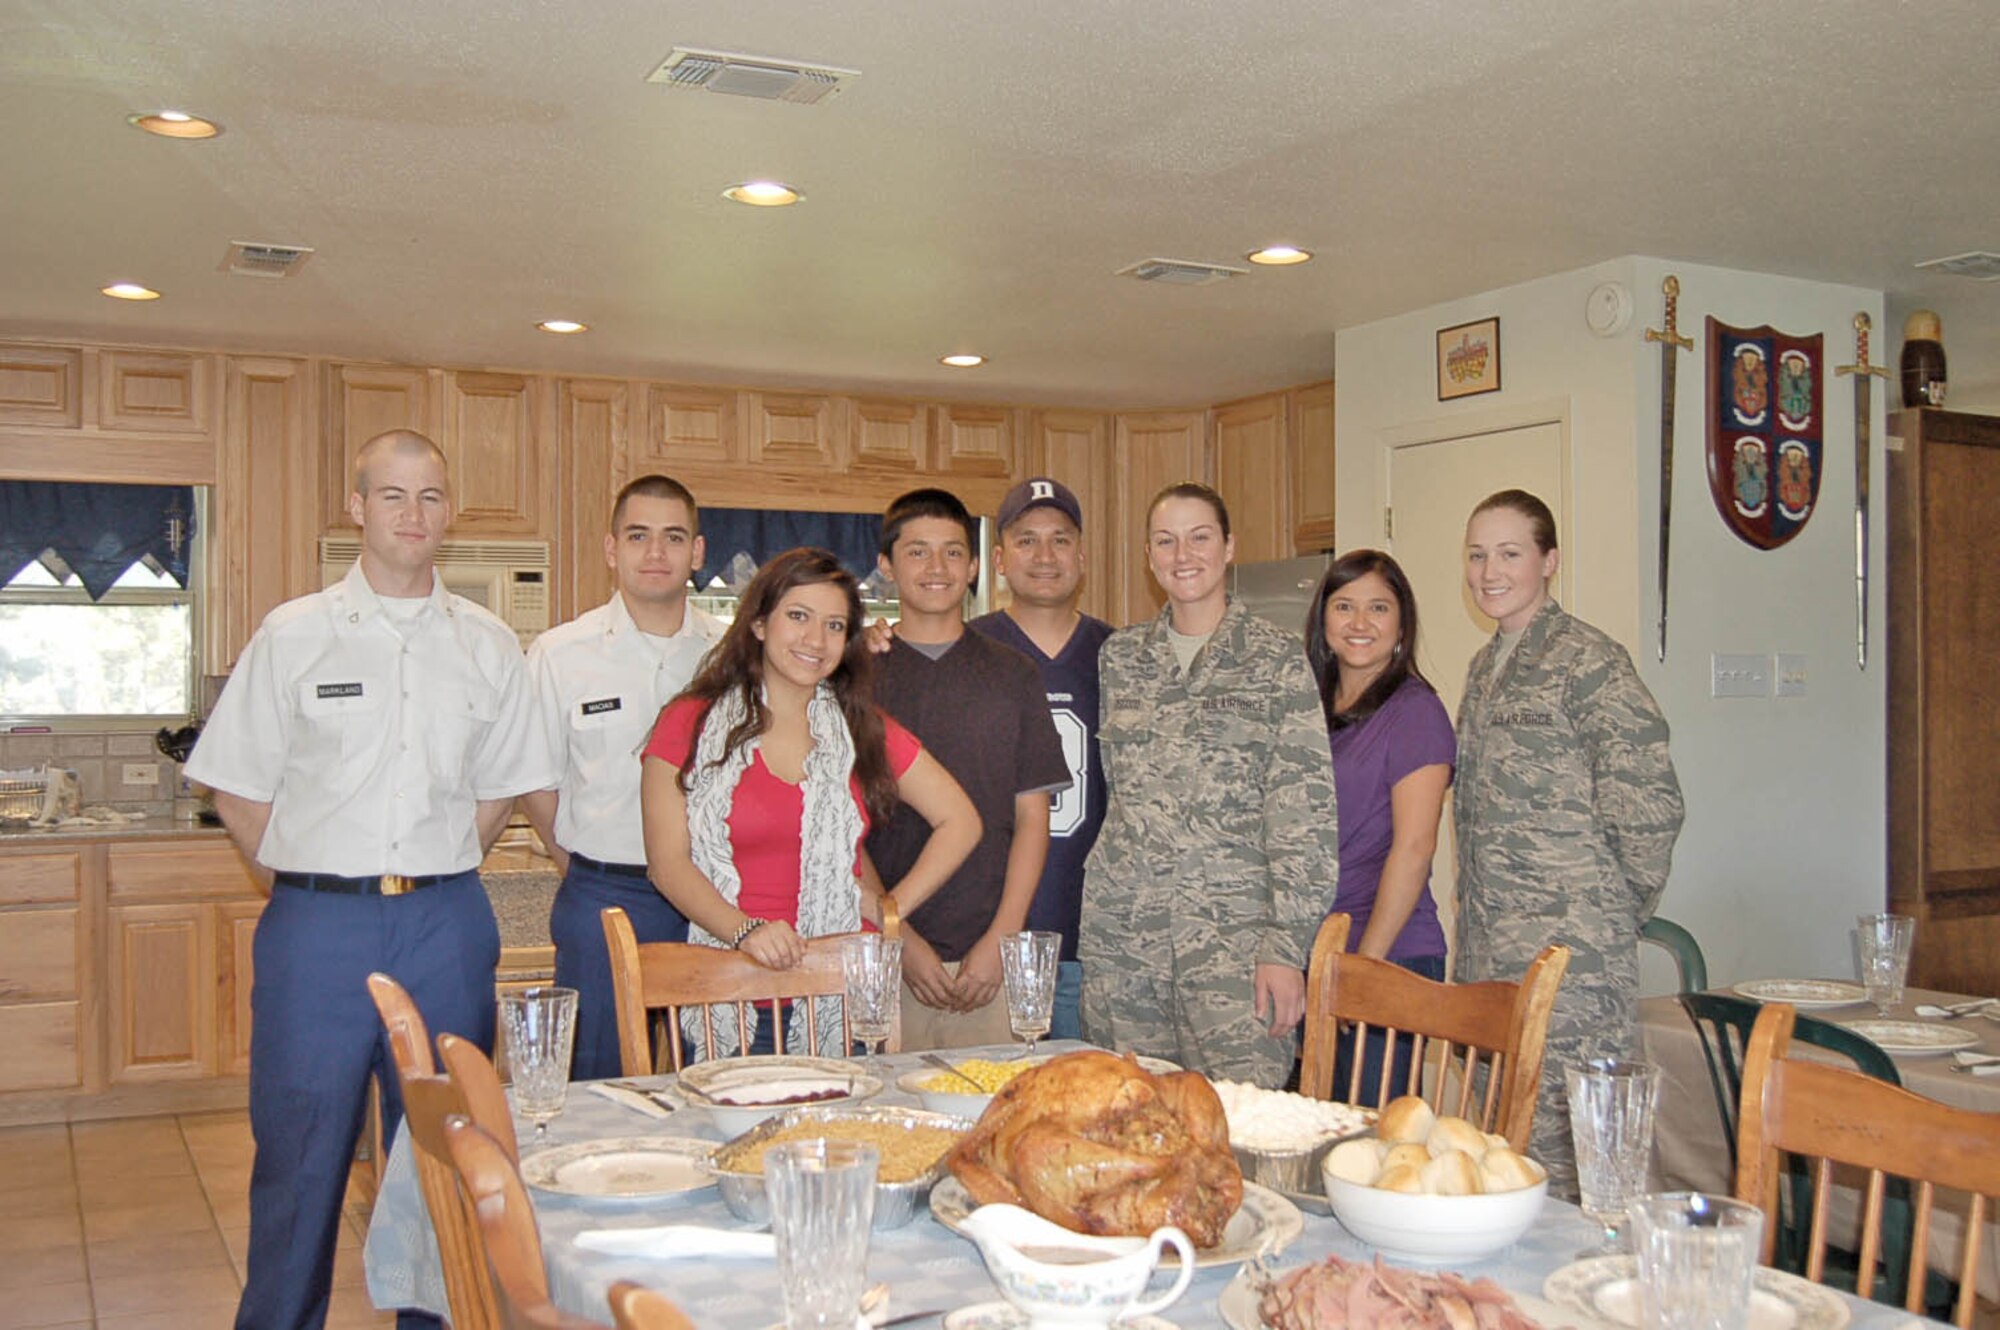 Chief Master Sgt. Jose Lopez, headquarters Air Education and Training Command Propulsion Chief, Directorate of Logistics, Installations and Mission Support, and his family, hosted two Air Force basic trainees from Lackland and two Soldiers from Fort Sam Houston for Operation Homecoming in 2011. From left to right are: Army combat medics Pfc. Benjamin Markland and Pfc. Albert Macias, daughter Saleena, son Cory, Chief Lopez, AB Brittany Osgood, wife Debra, and AB Allie Skallerud. (Courtesy Photo)